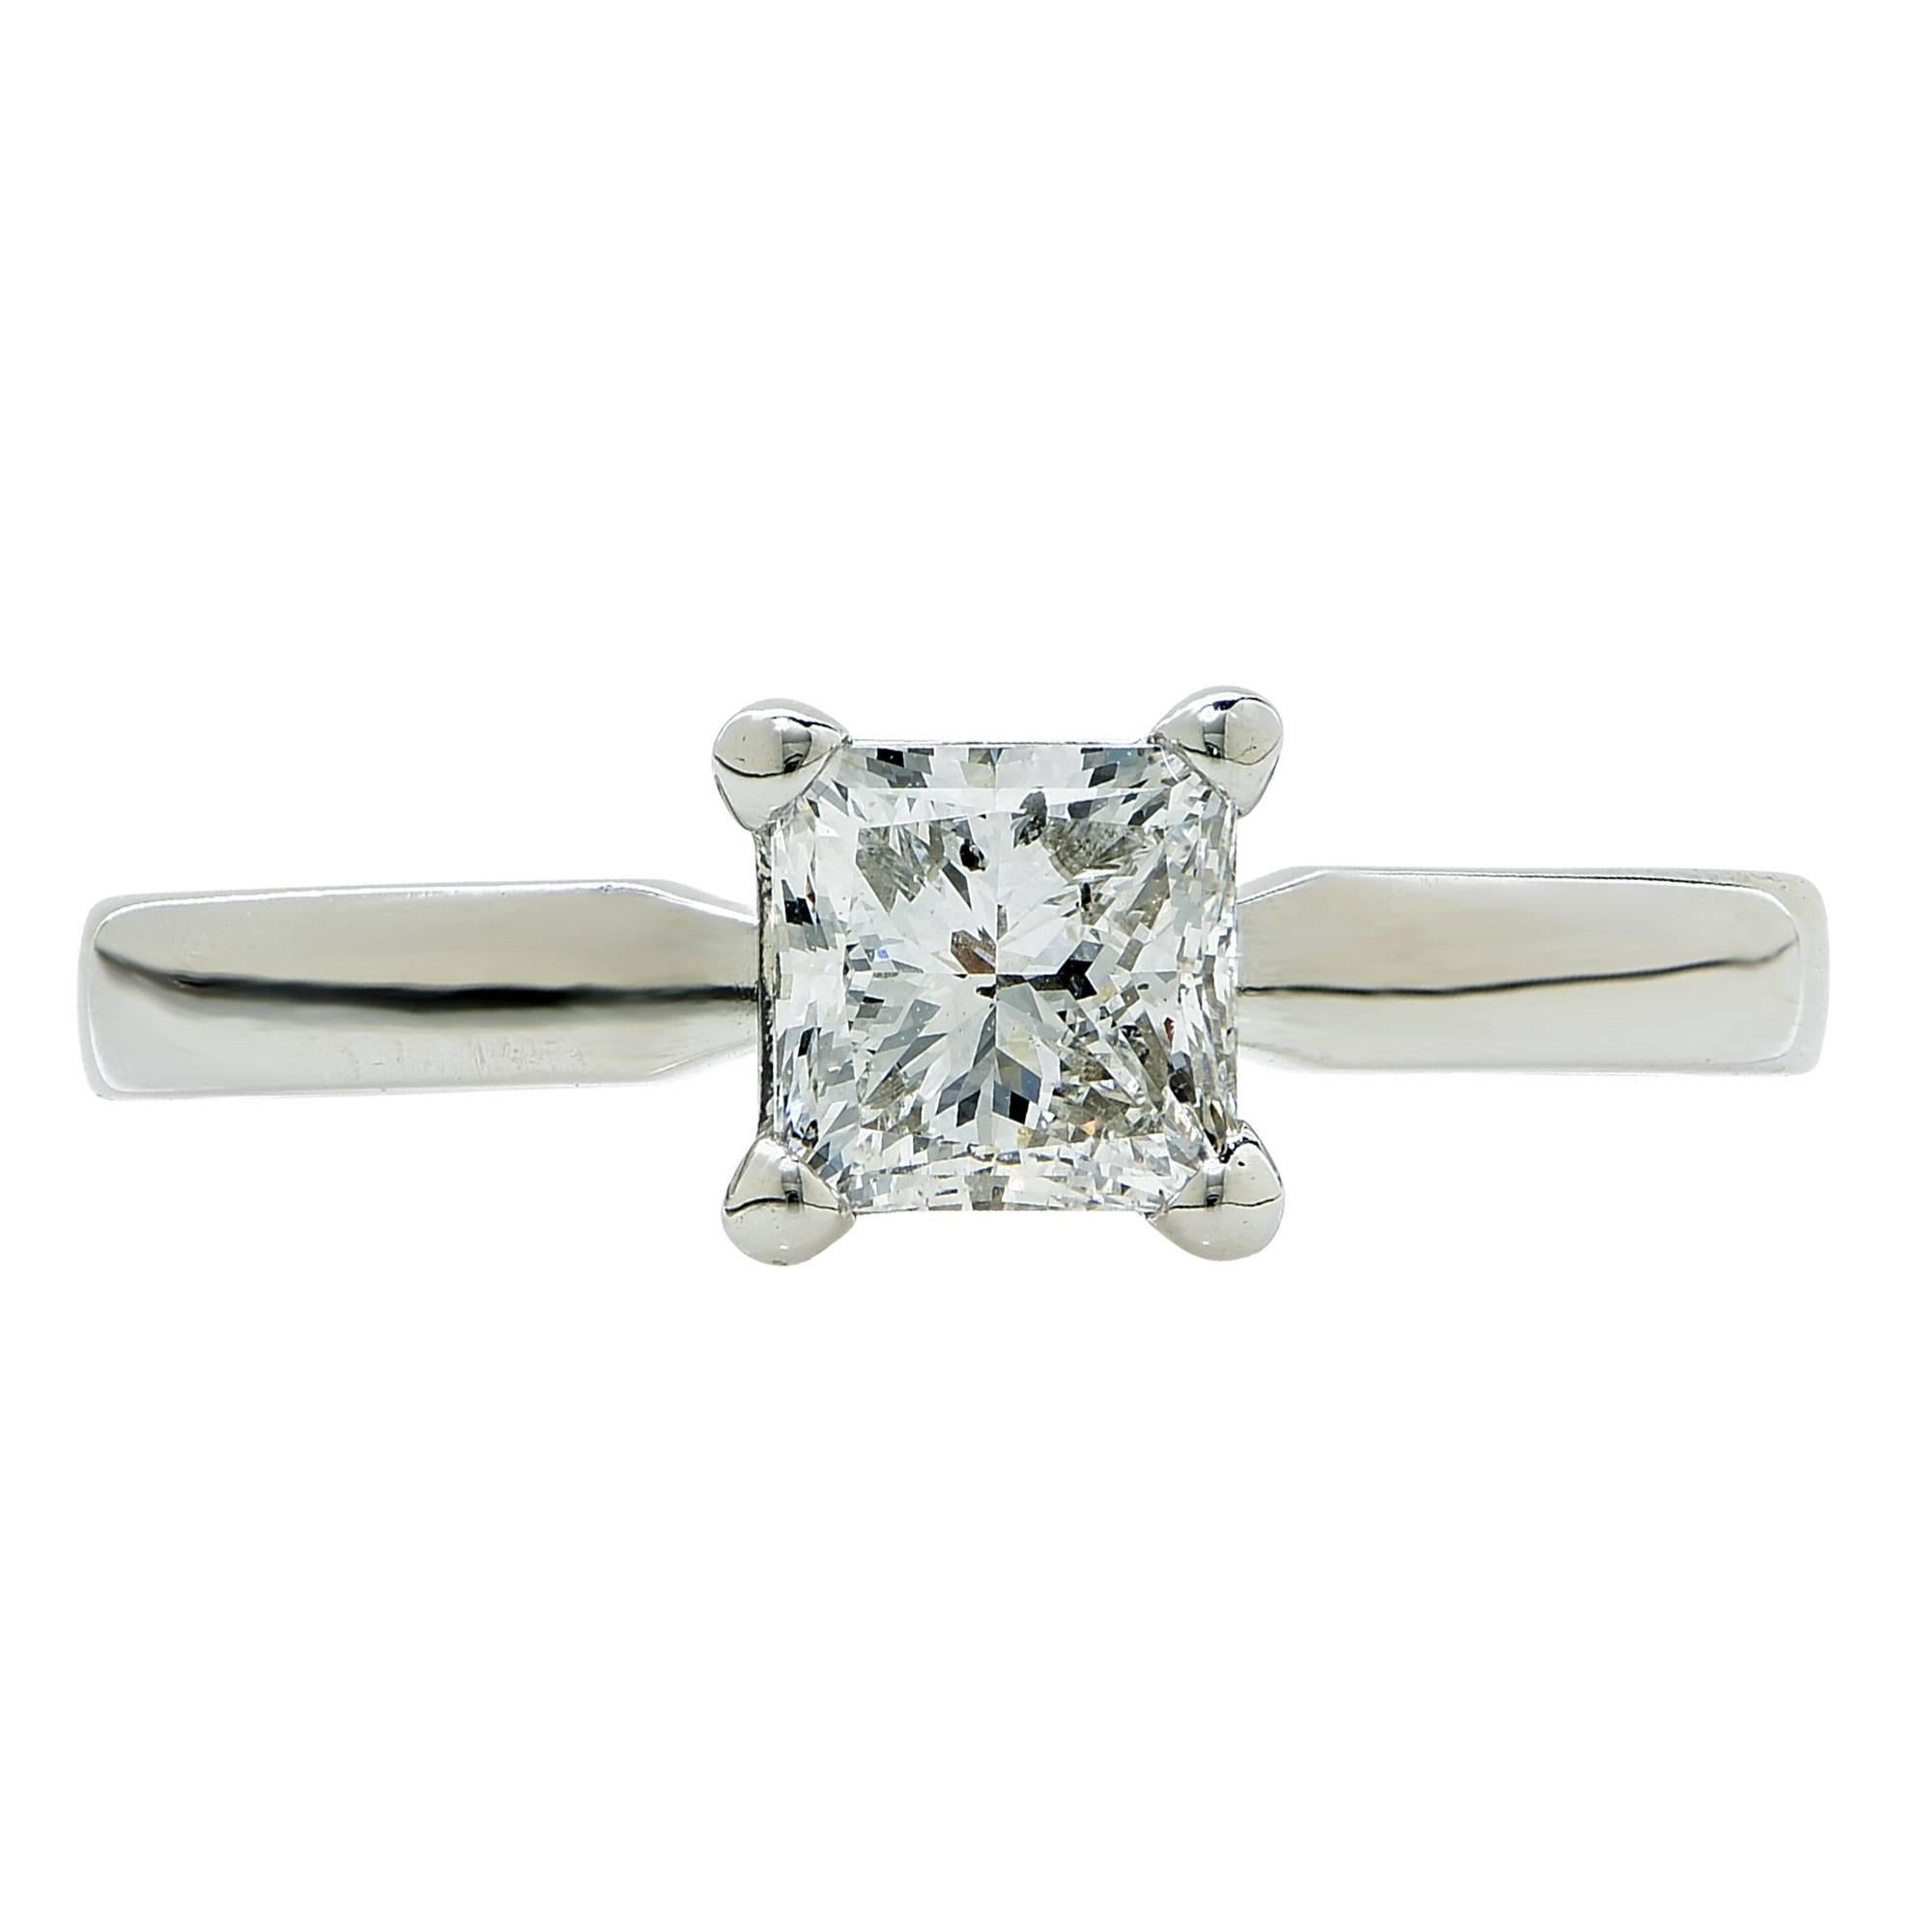 Platinum solitaire ring featuring a 1ct GIA graded princess cut diamond F color SI2 clarity.

The ring is a size 6.75 and can be sized up or down.
It is stamped and tested as platinum.
The metal weight is 5.28 grams.

This diamond ring is